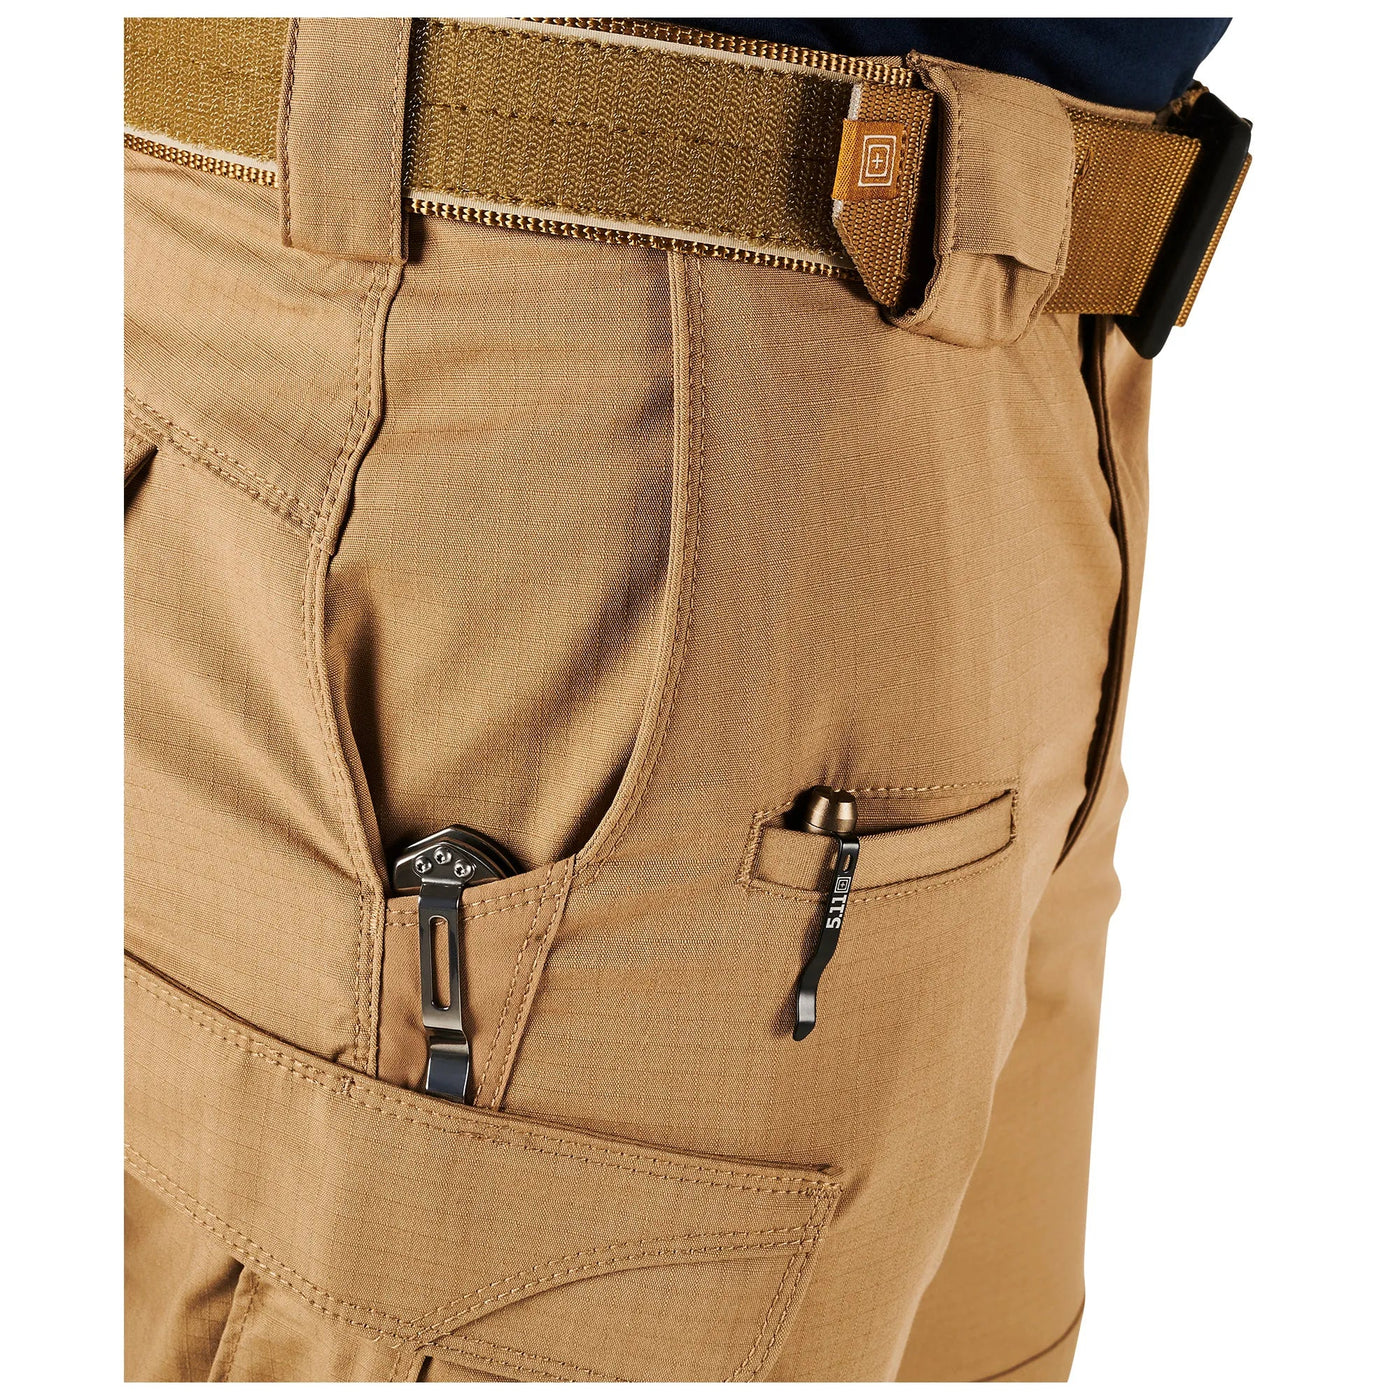 5.11 TACTICAL® STRYKE PANT in COYOTE – Western Fire Supply